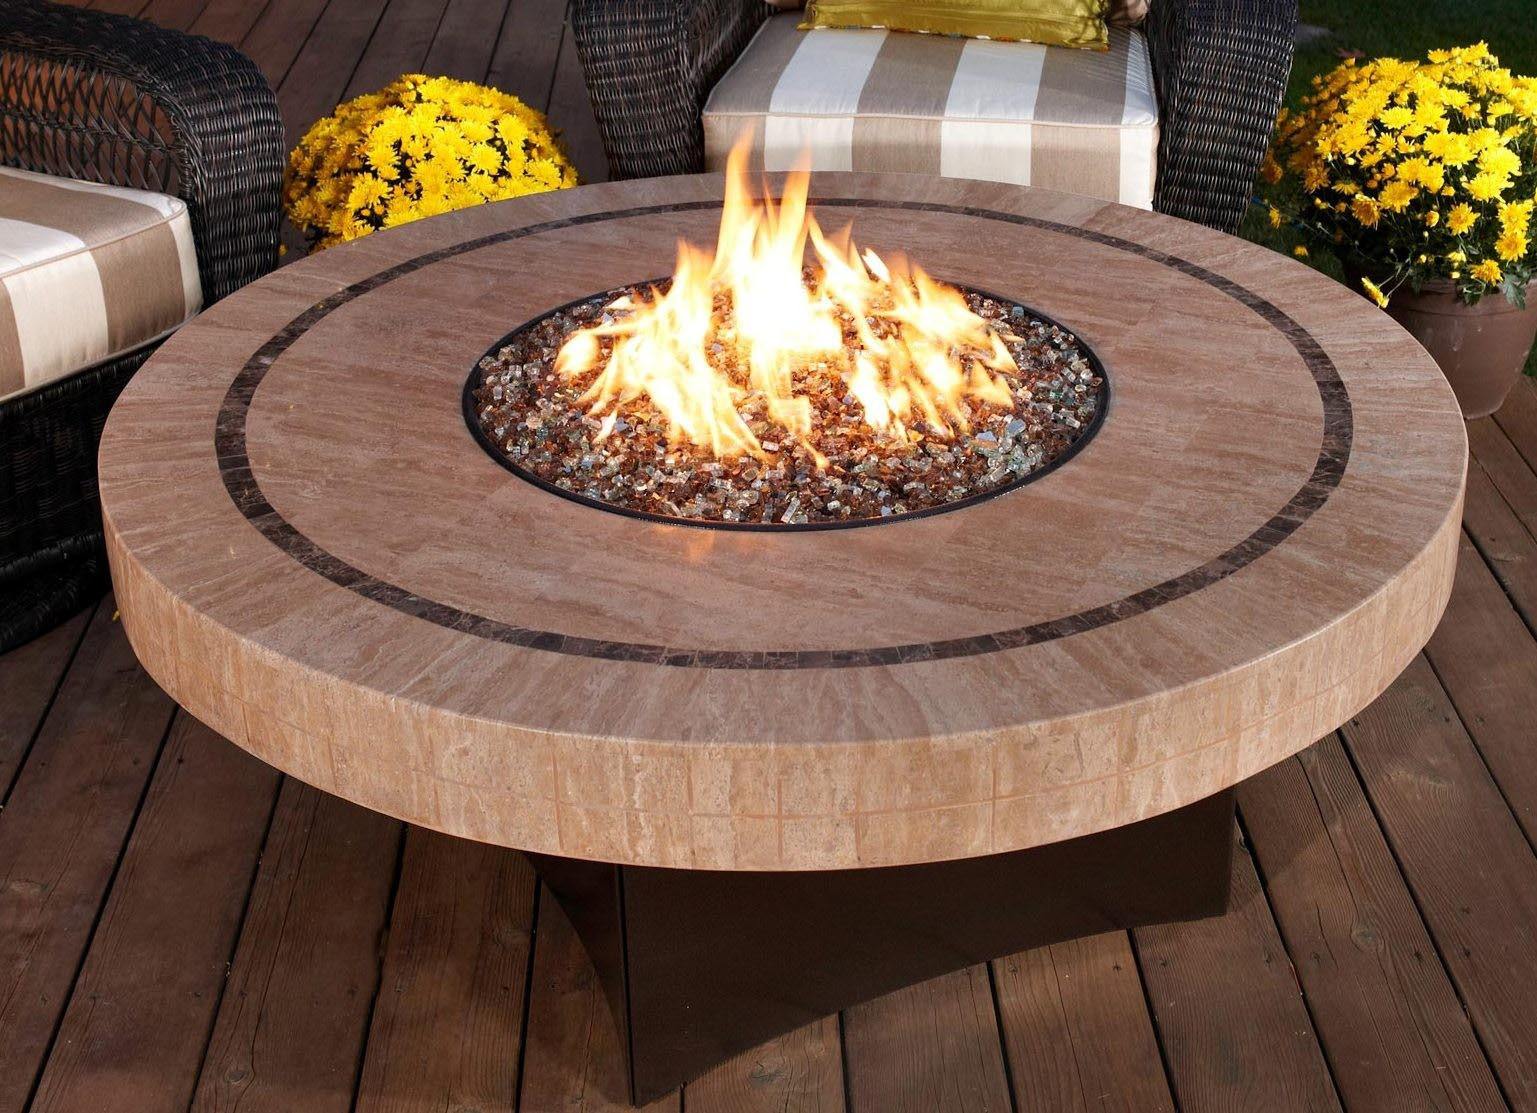 Patio Table With Firepit
 Small Fire Pit Table